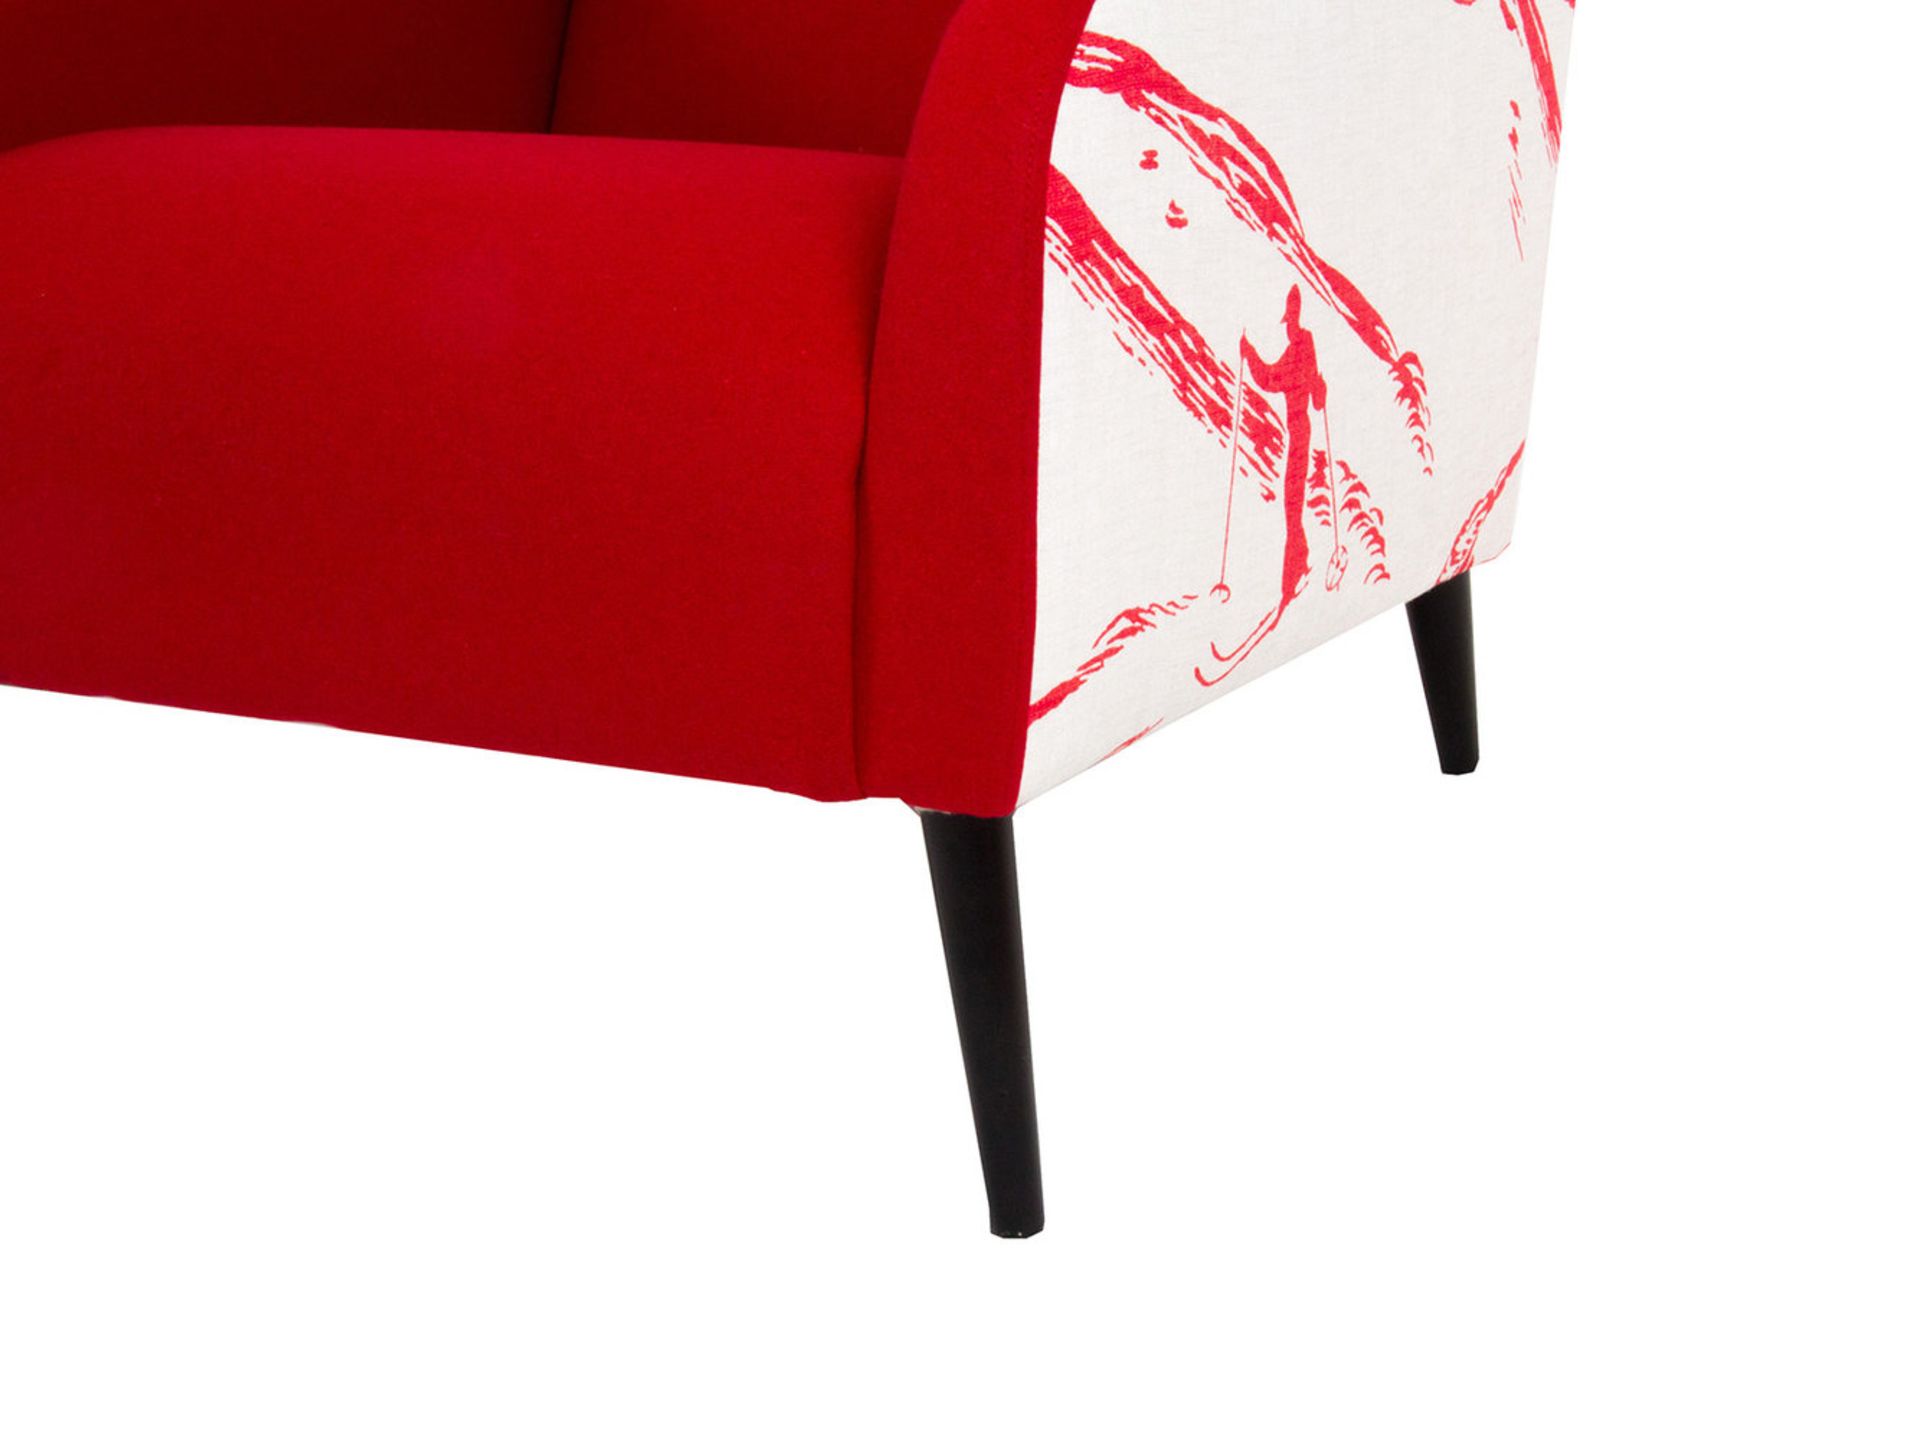 1 x Lauran Armchair Upholstered in Aviemore Skiing Fabric in Red and White - RRP £779! - Image 4 of 7